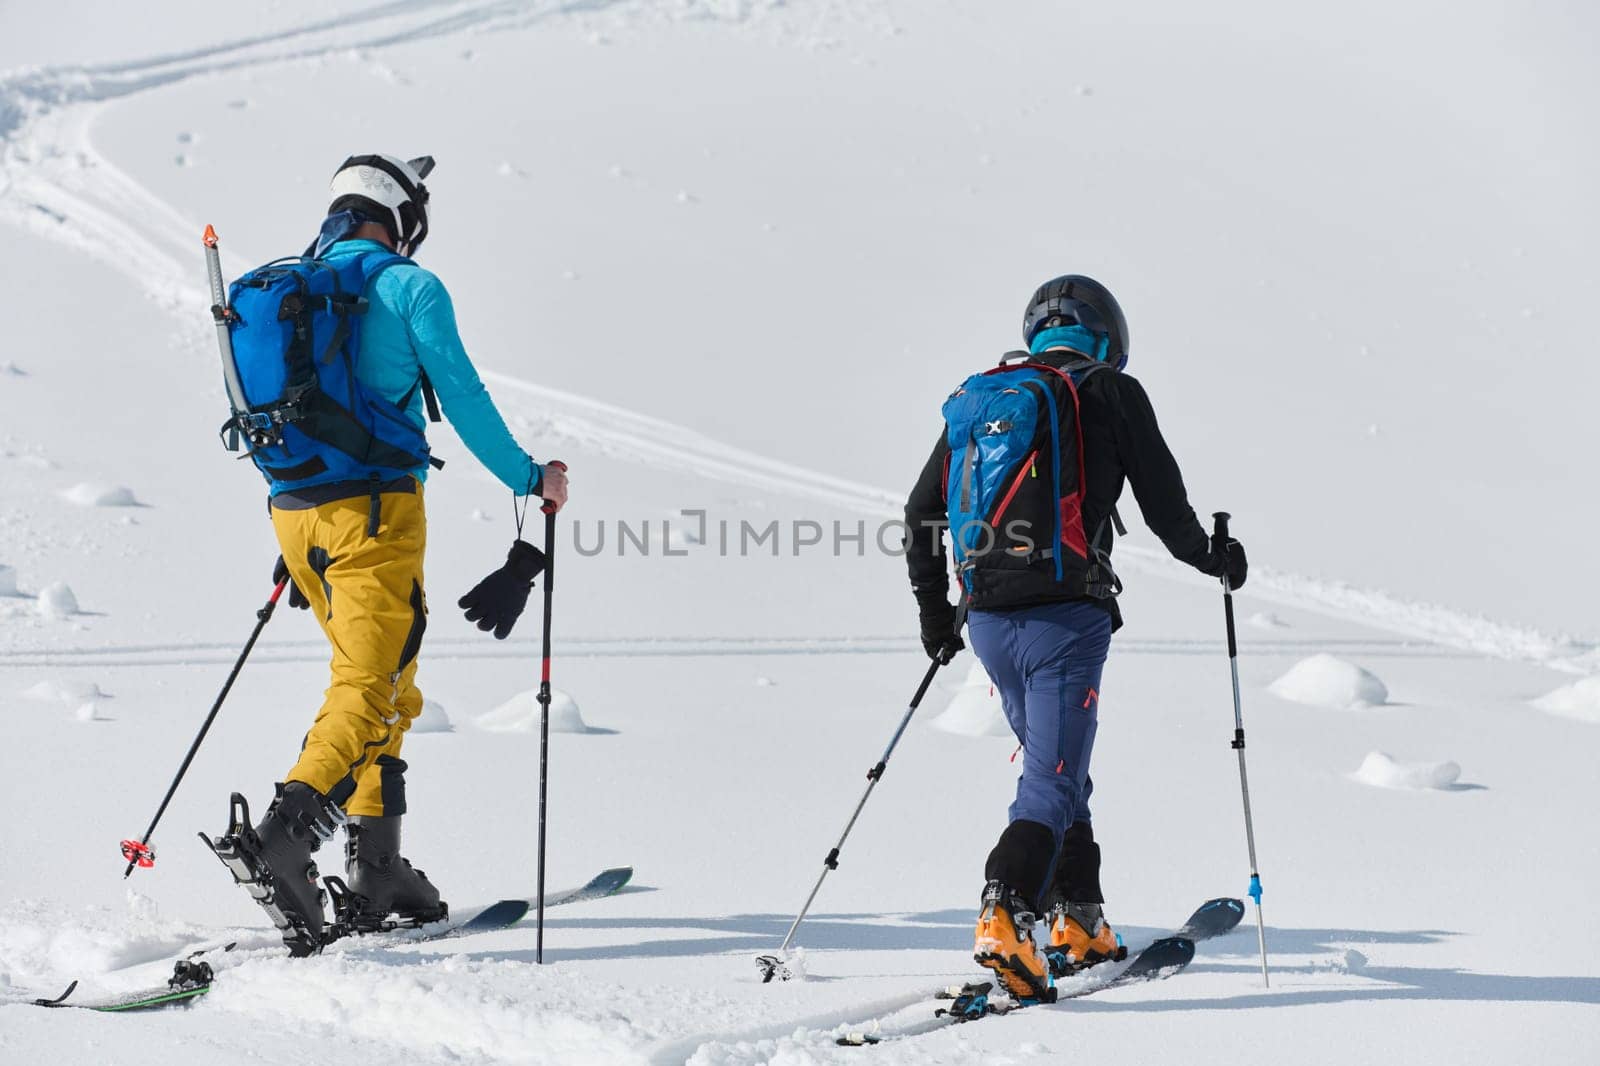 Alpine Ascent: Two Professional Skiers Conquer Snowy Peaks as a Determined Team. by dotshock